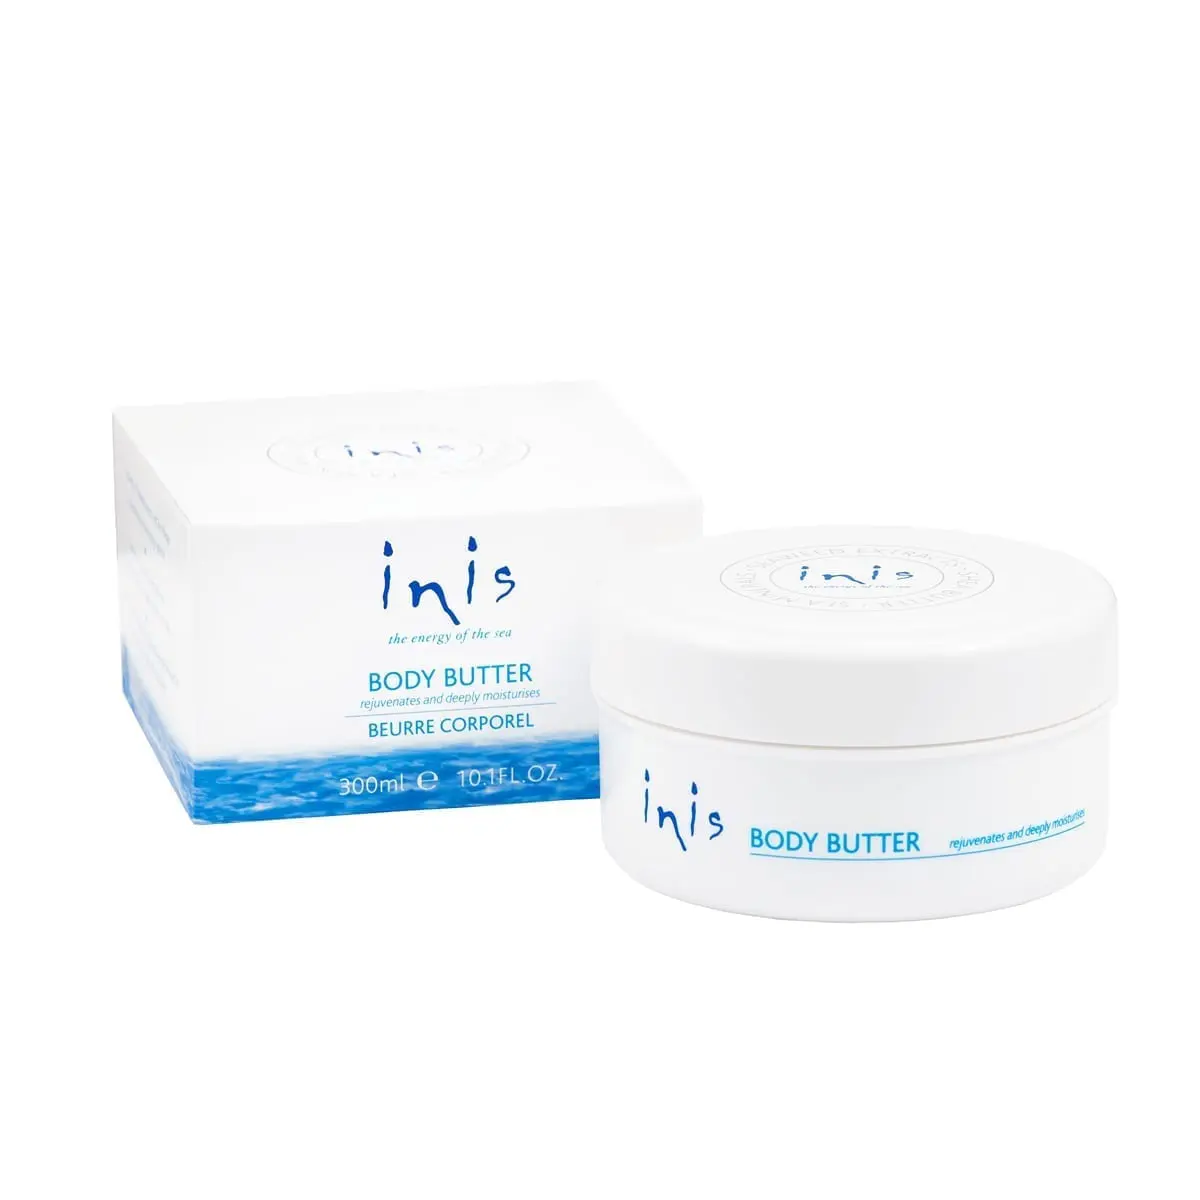 Inis Body Butter image